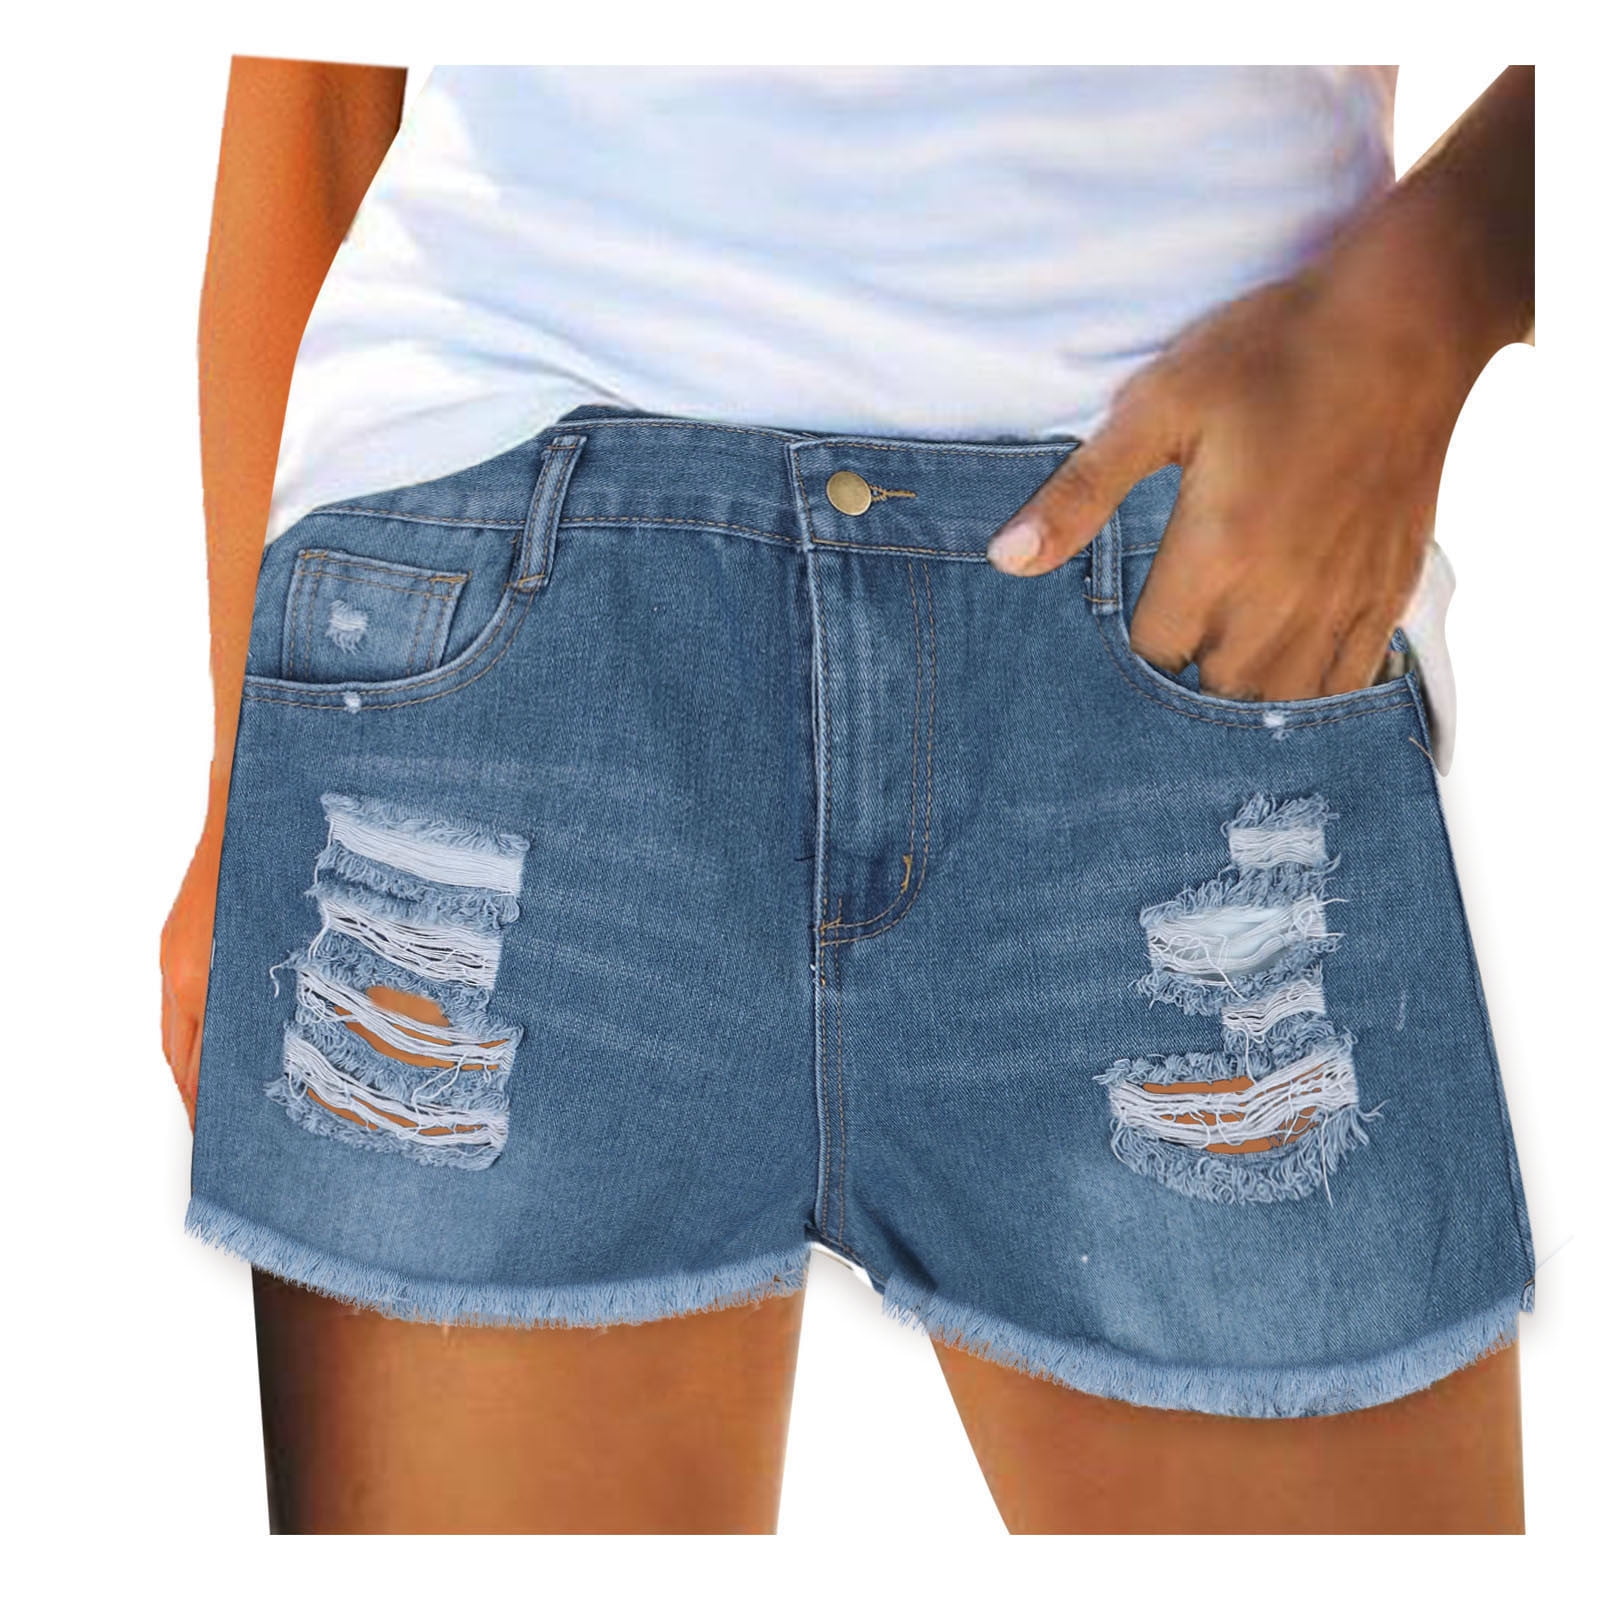 fvwitlyh Scrunch Bbl Shorts Women's High Waisted Rolled Hem Distressed Jeans  Ripped Denim Shorts 